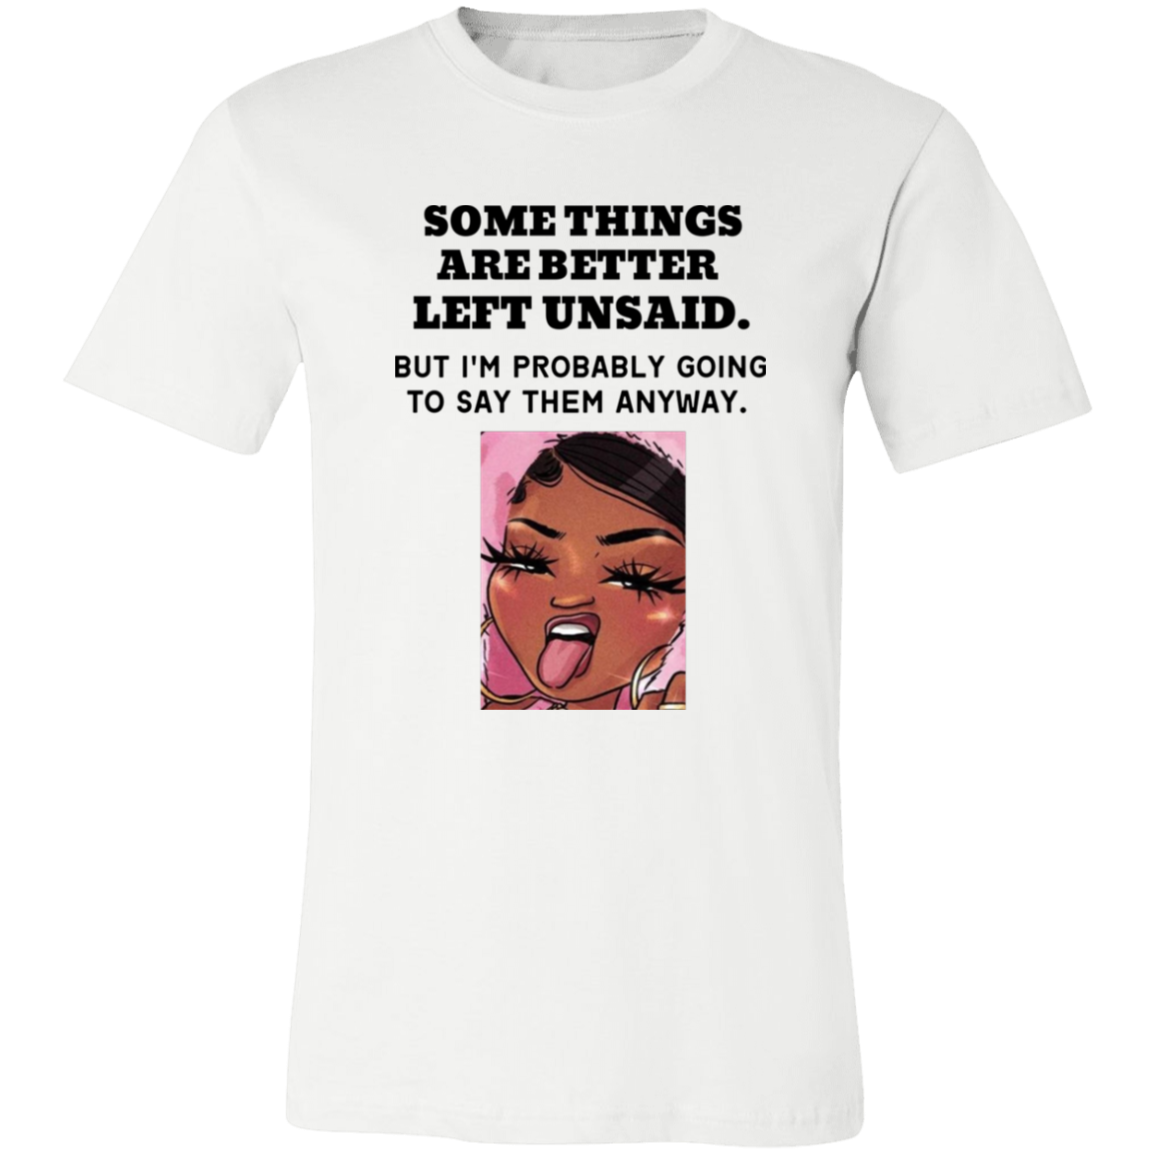 Some Things Are Better Left Unsaid Unisex Jersey Short-Sleeve T-Shirt, Funny Quote Shirts, Feminist Shirt, Novelty T-shirt, Sarcastic T-shirt